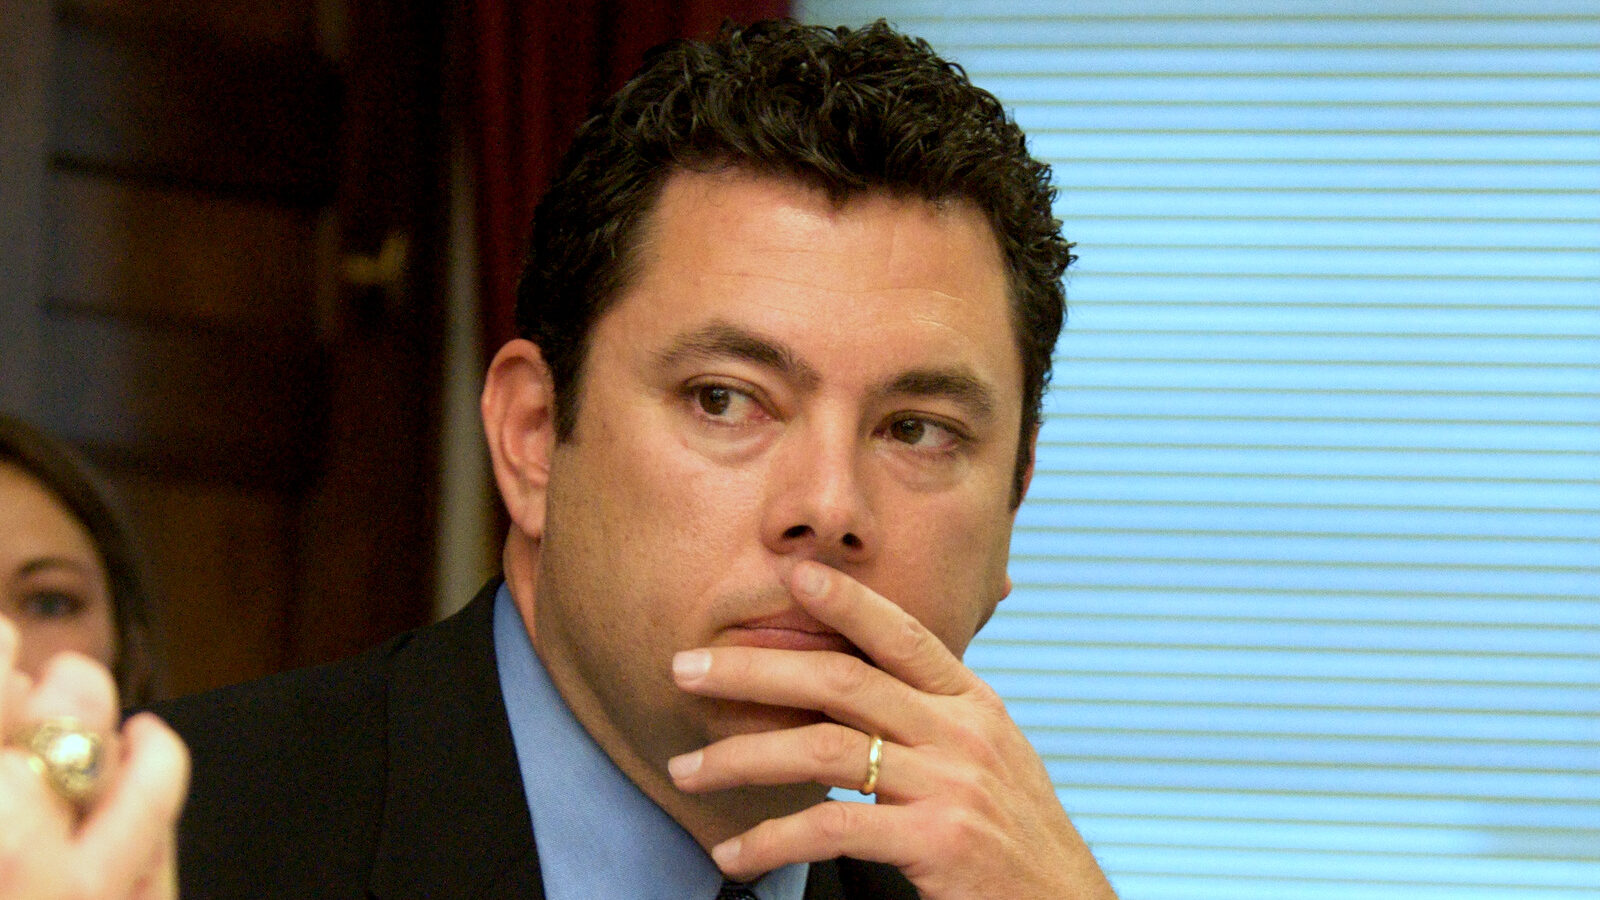 Utah Republican Jason Chaffetz is hard at work dissecting the White House's bid for peace with Iran. (Photo: House GOP/flickr)